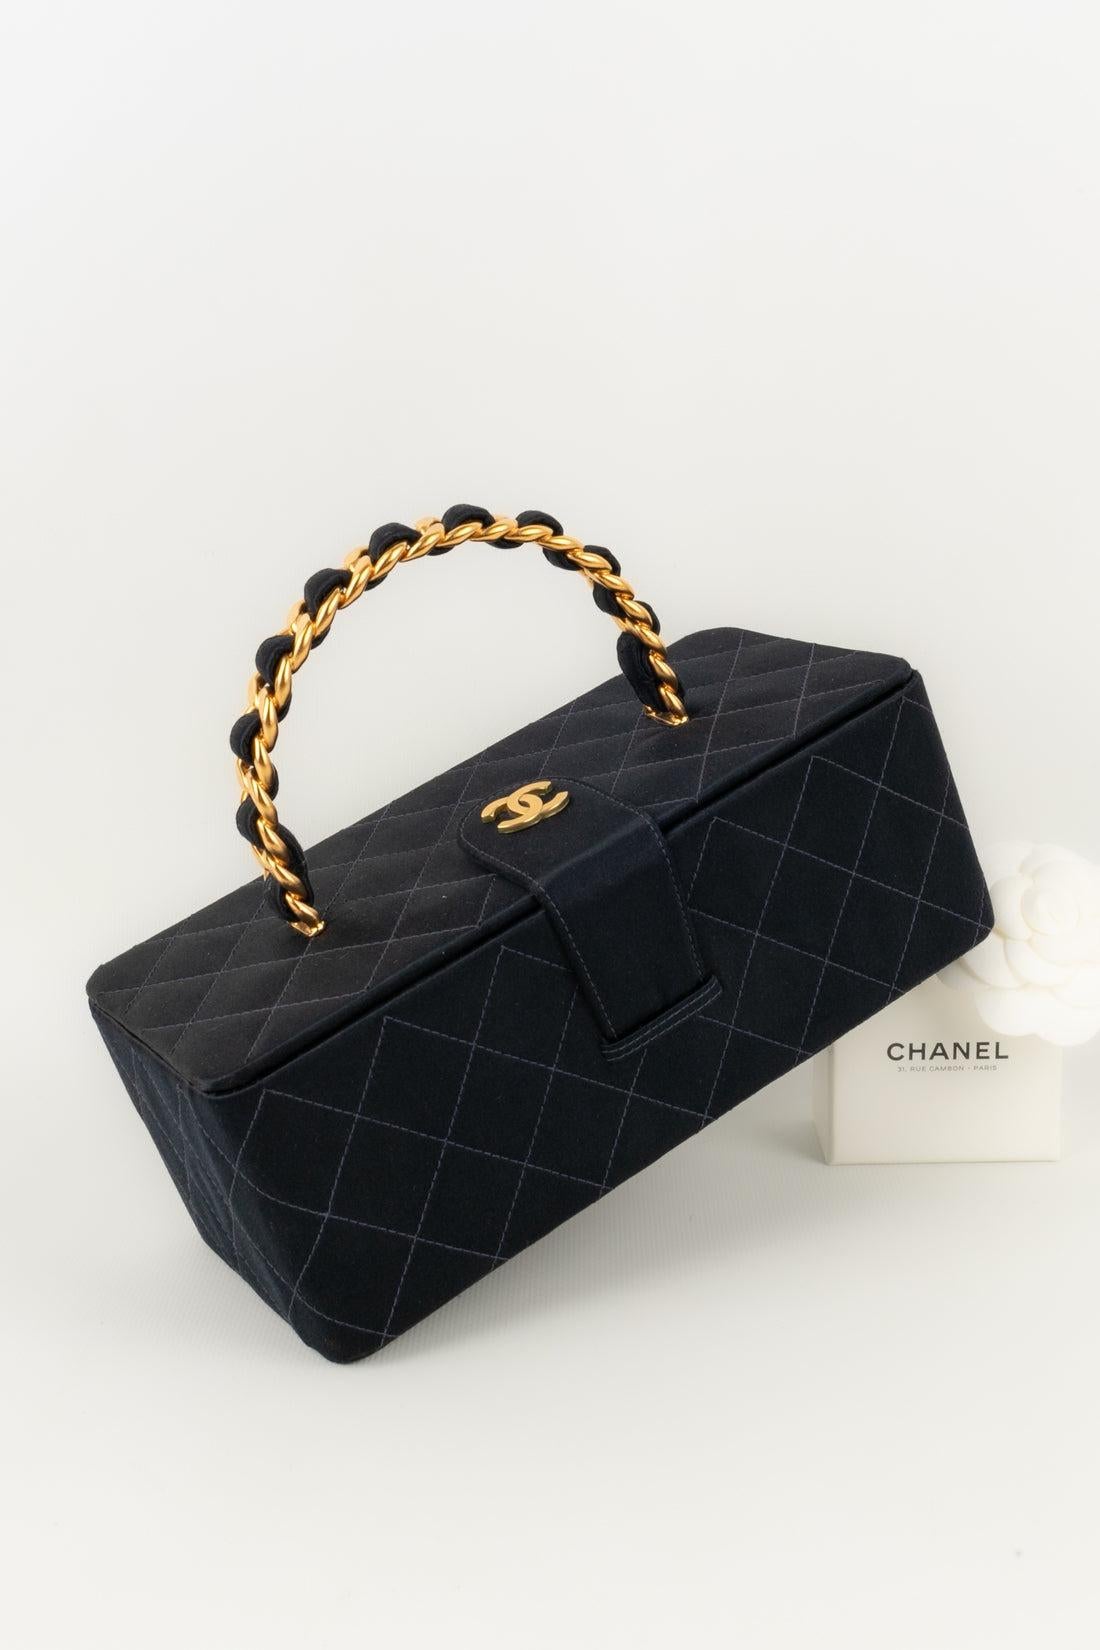 Chanel - (Made in France) Quilted silk satin bag with golden metal elements and with a serial number. 1994/1996 Collection.

Additional information:
Condition: Very good condition
Dimensions: Length: 21.5 cm - Height: 8 cm - Depth: 9.5 cm - Handle: